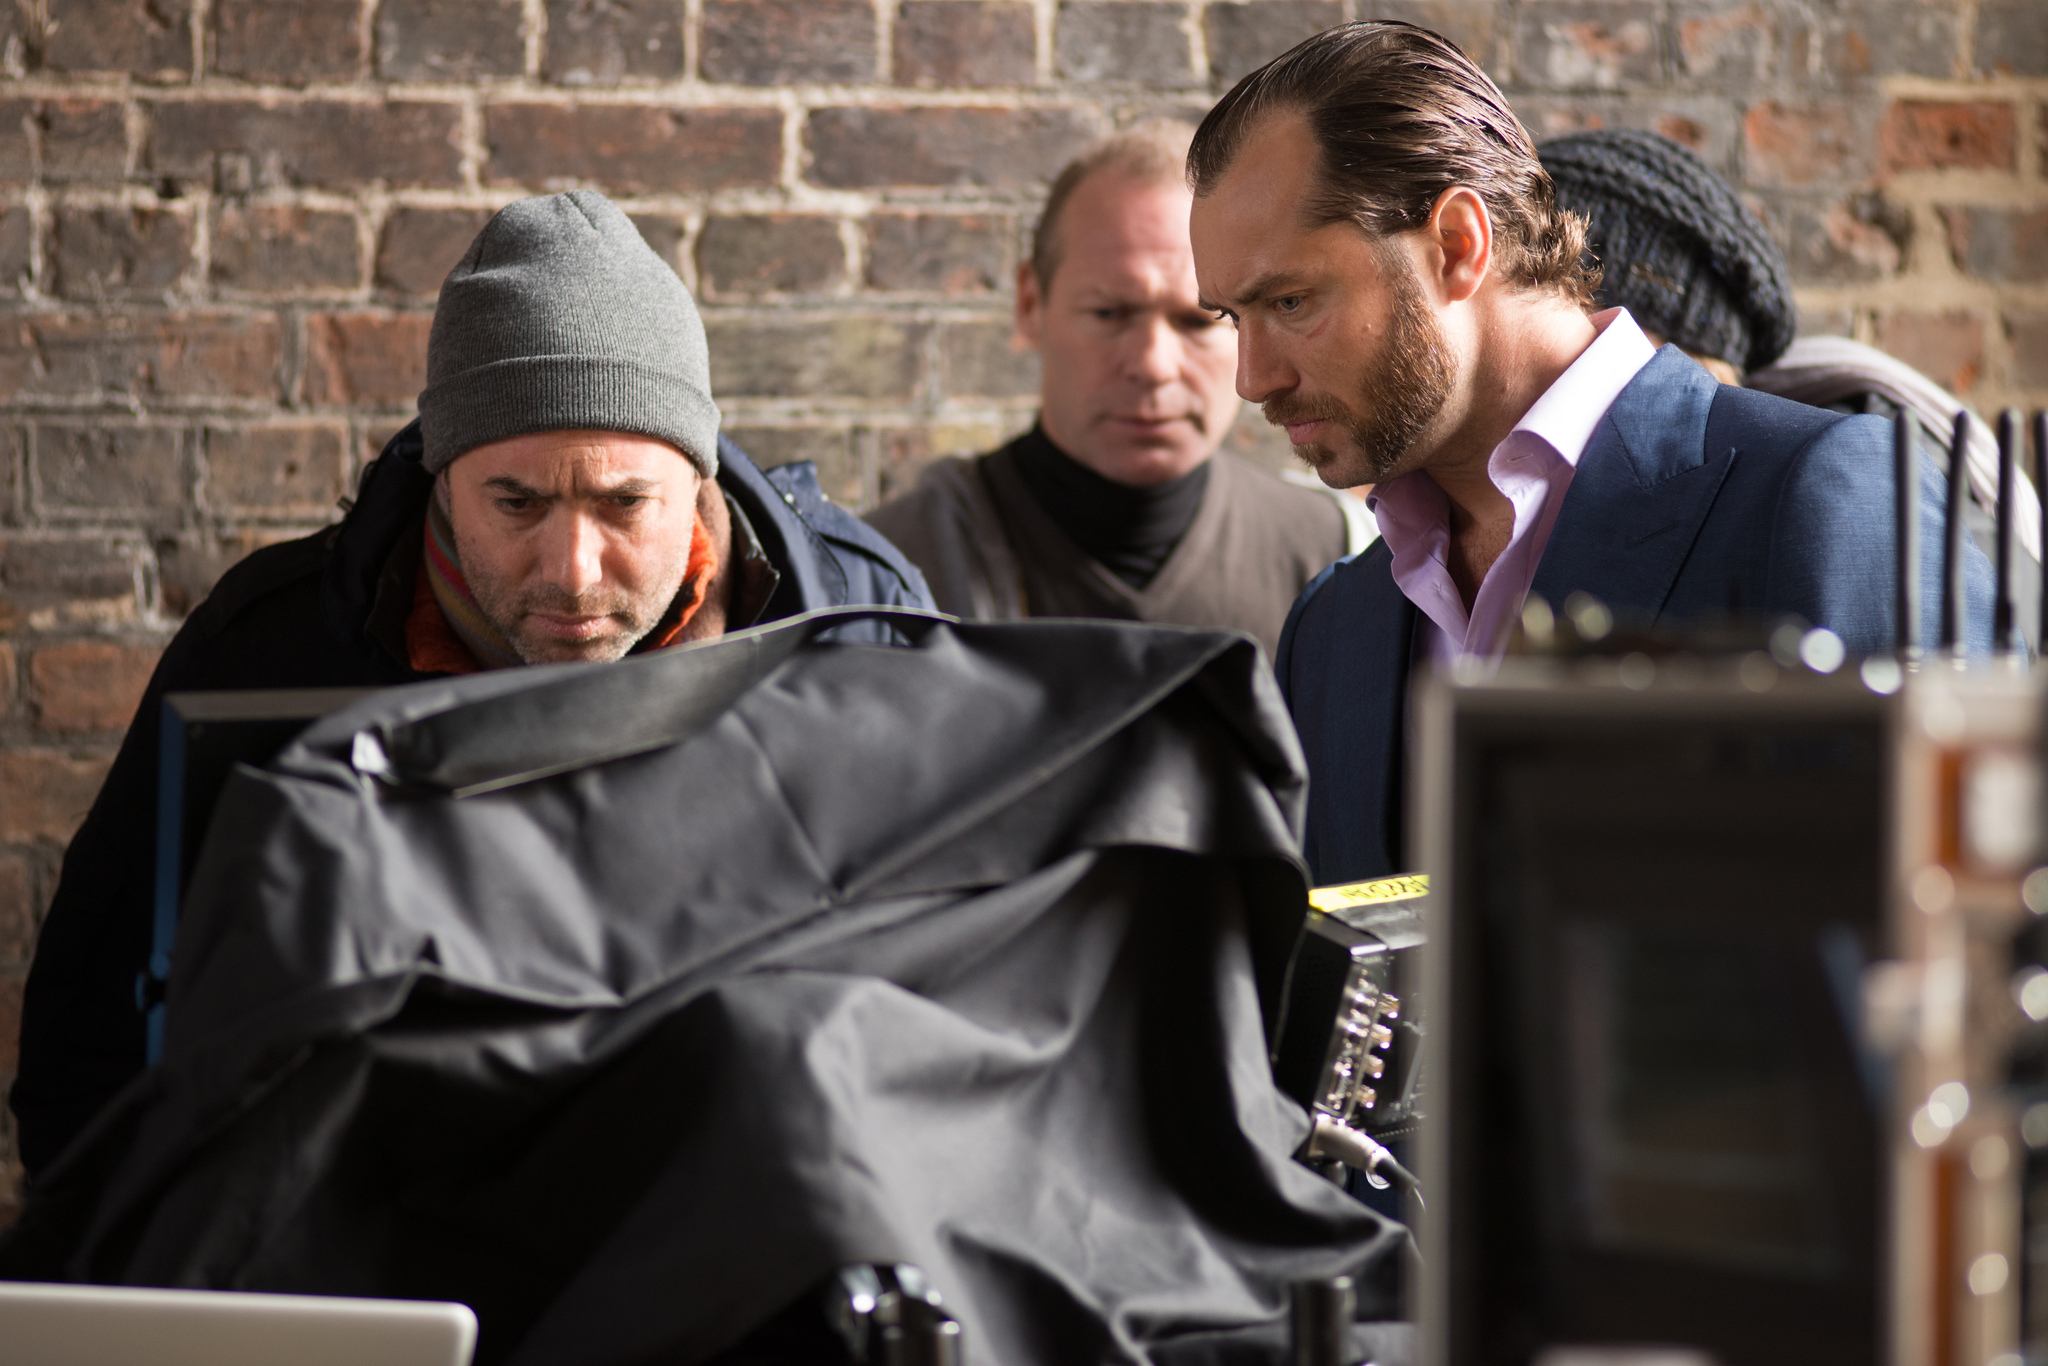 Richard Shepard and Jude Law on the set of DOM HEMINGWAY.